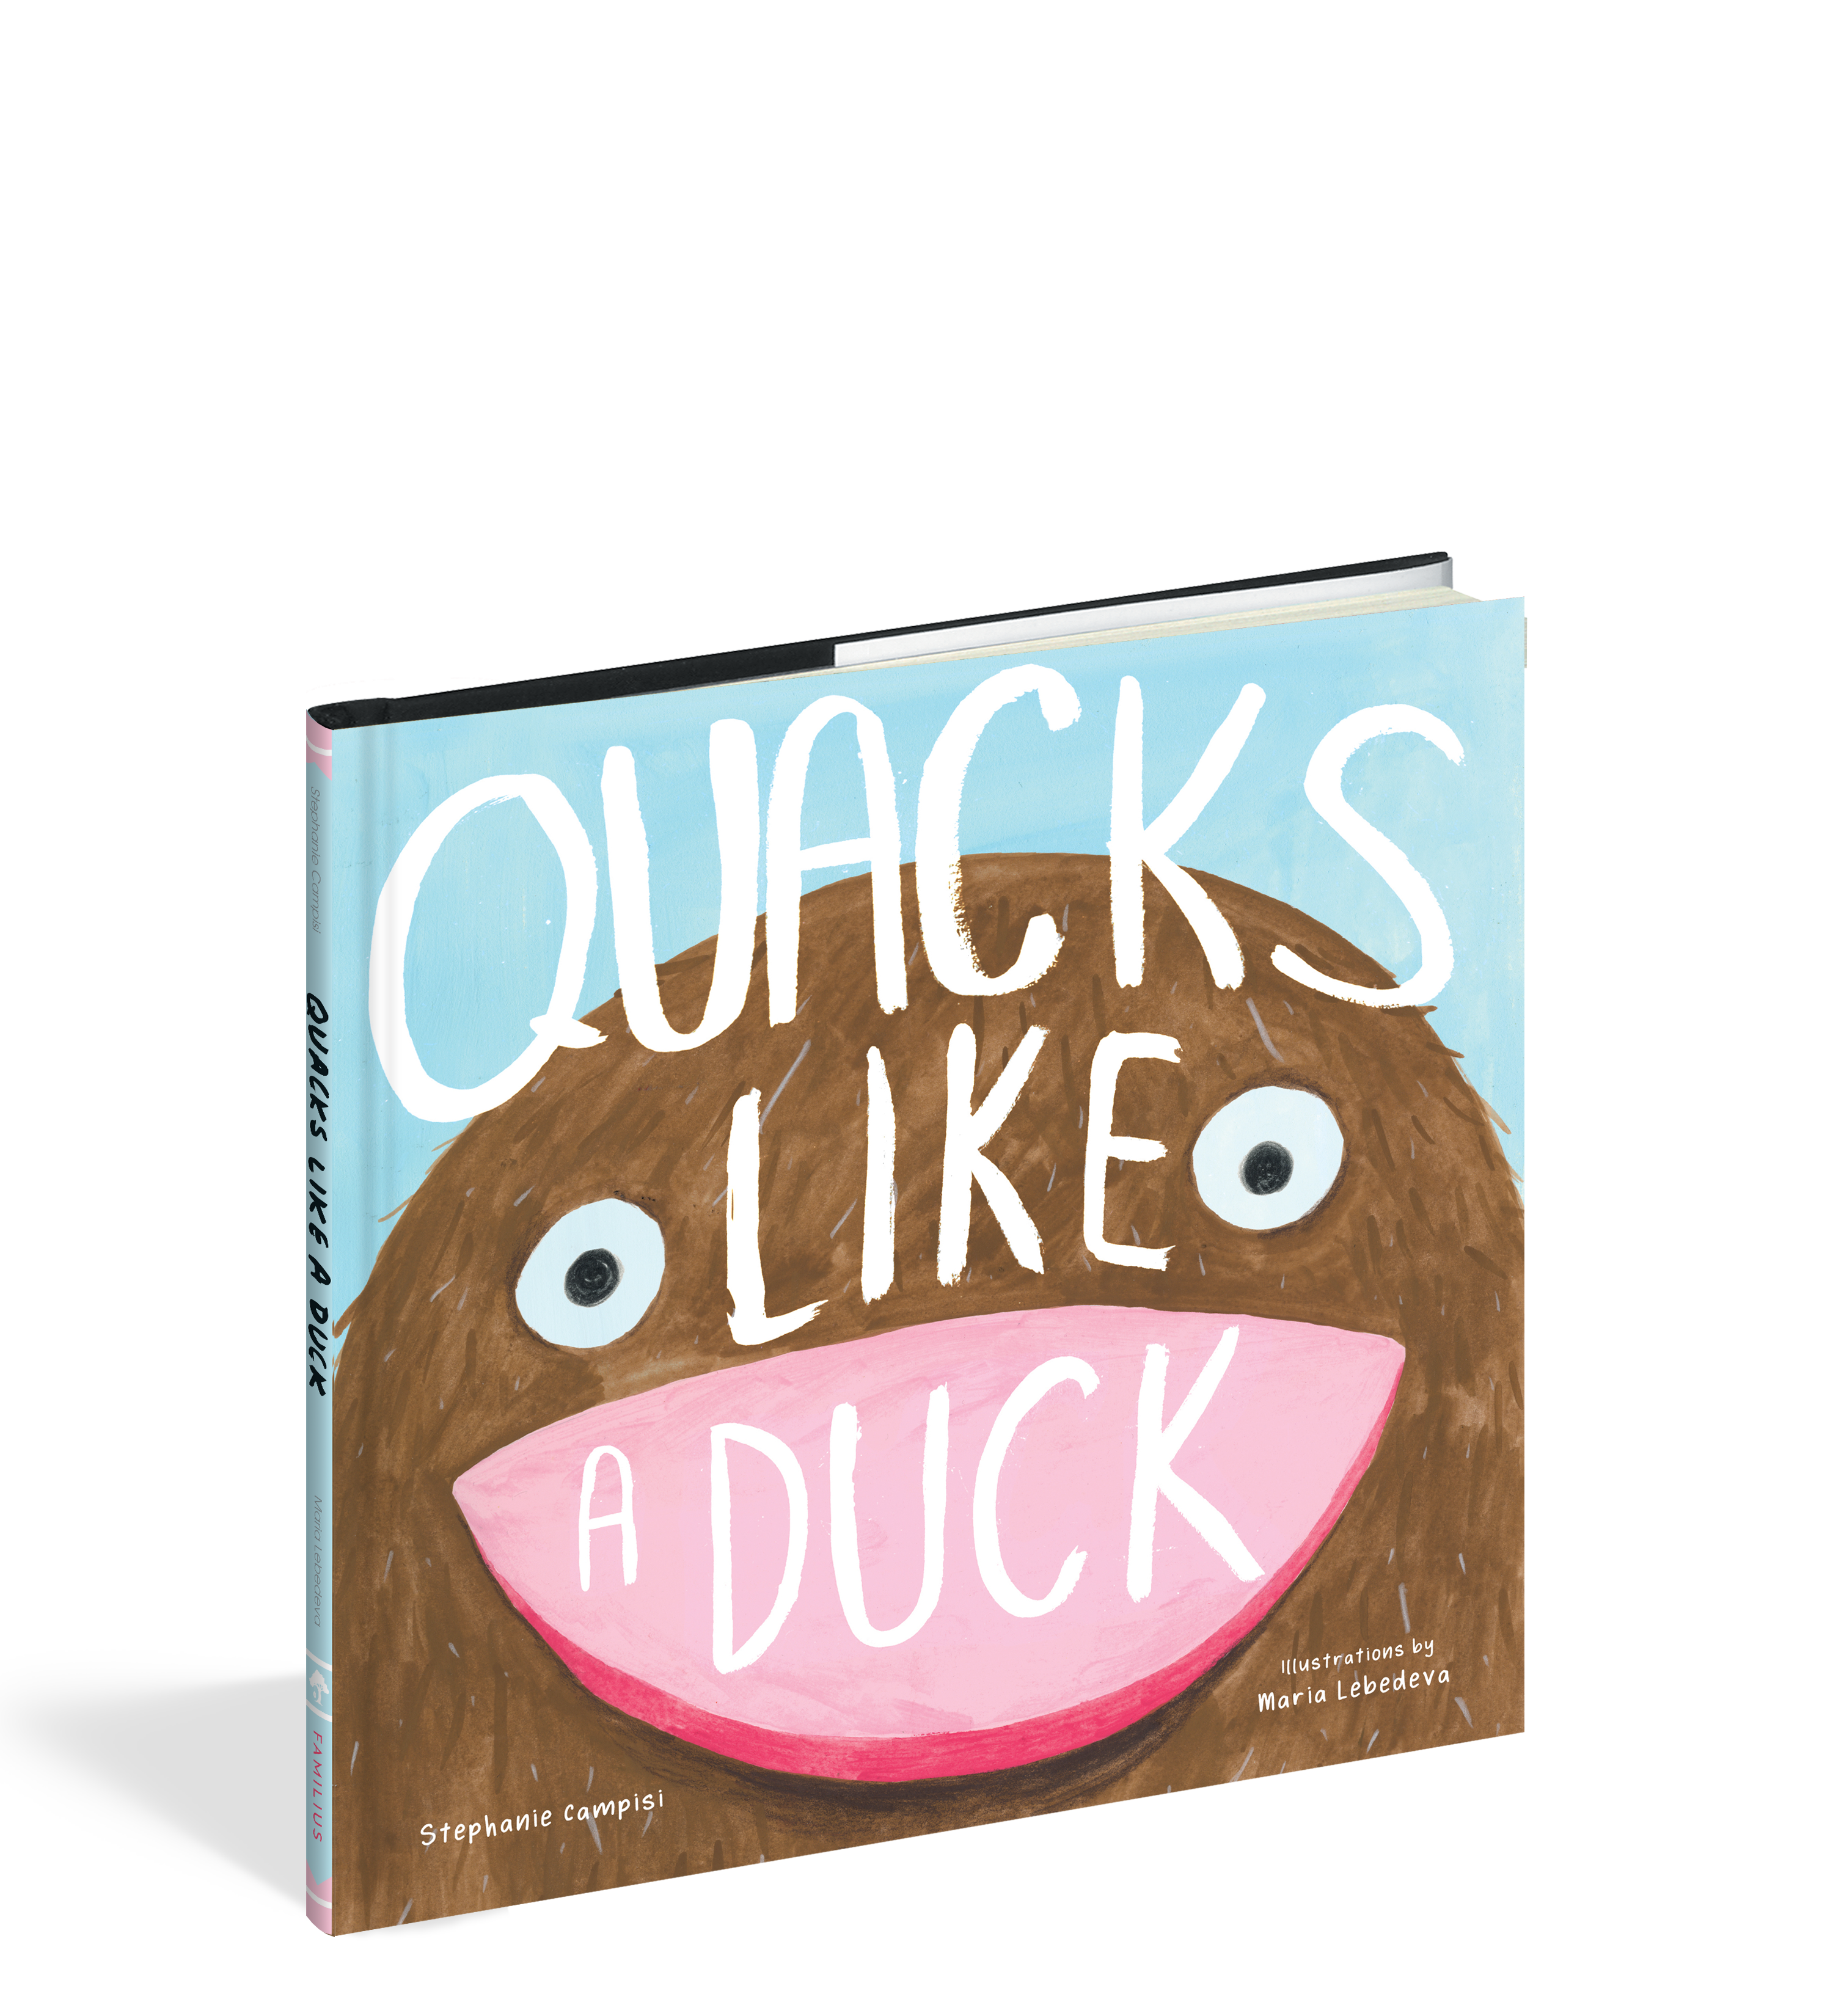 The cover of the picture book Quacks Like a Duck.